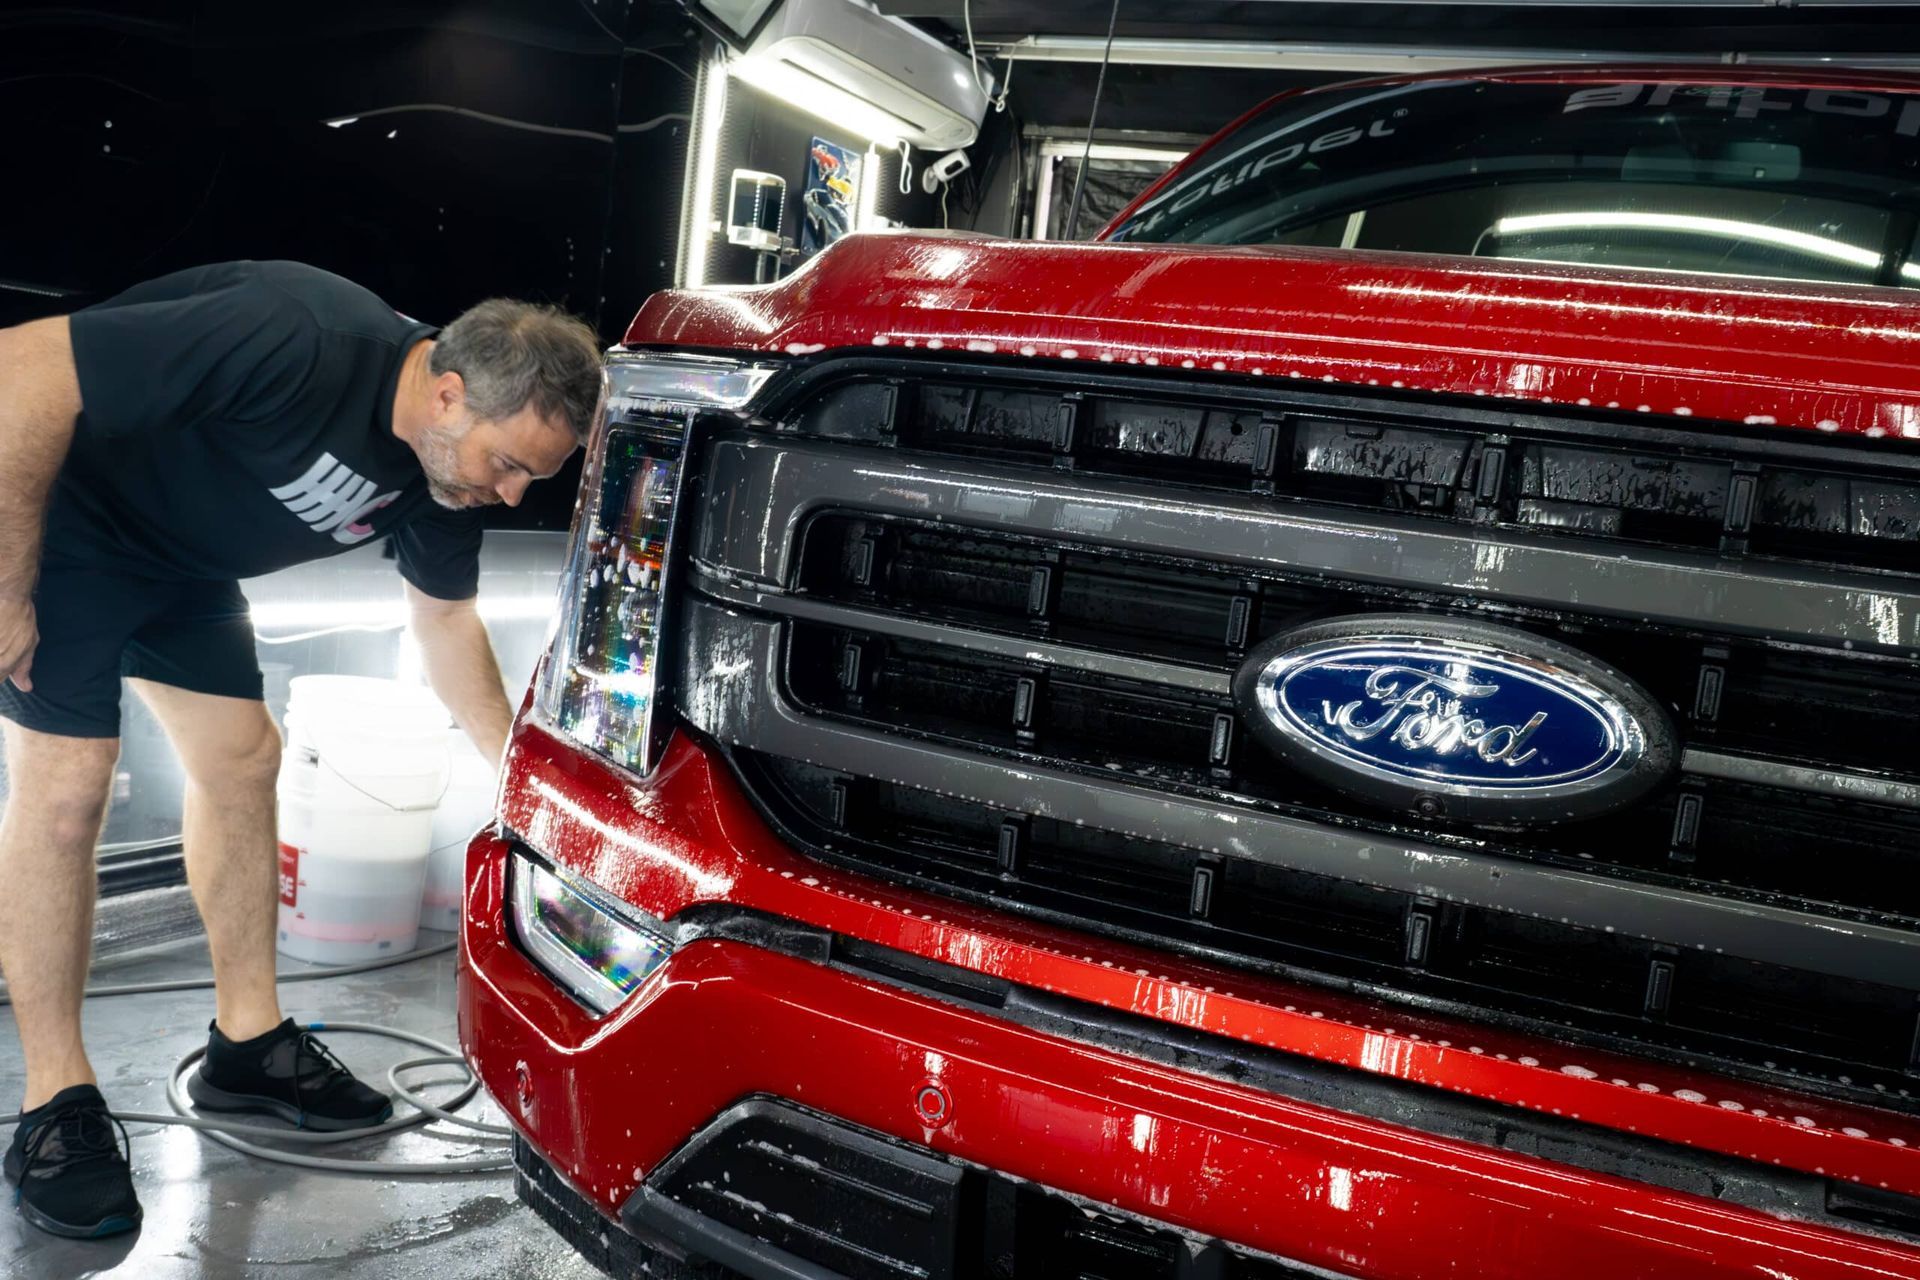 A man is looking at the front of a red ford truck.